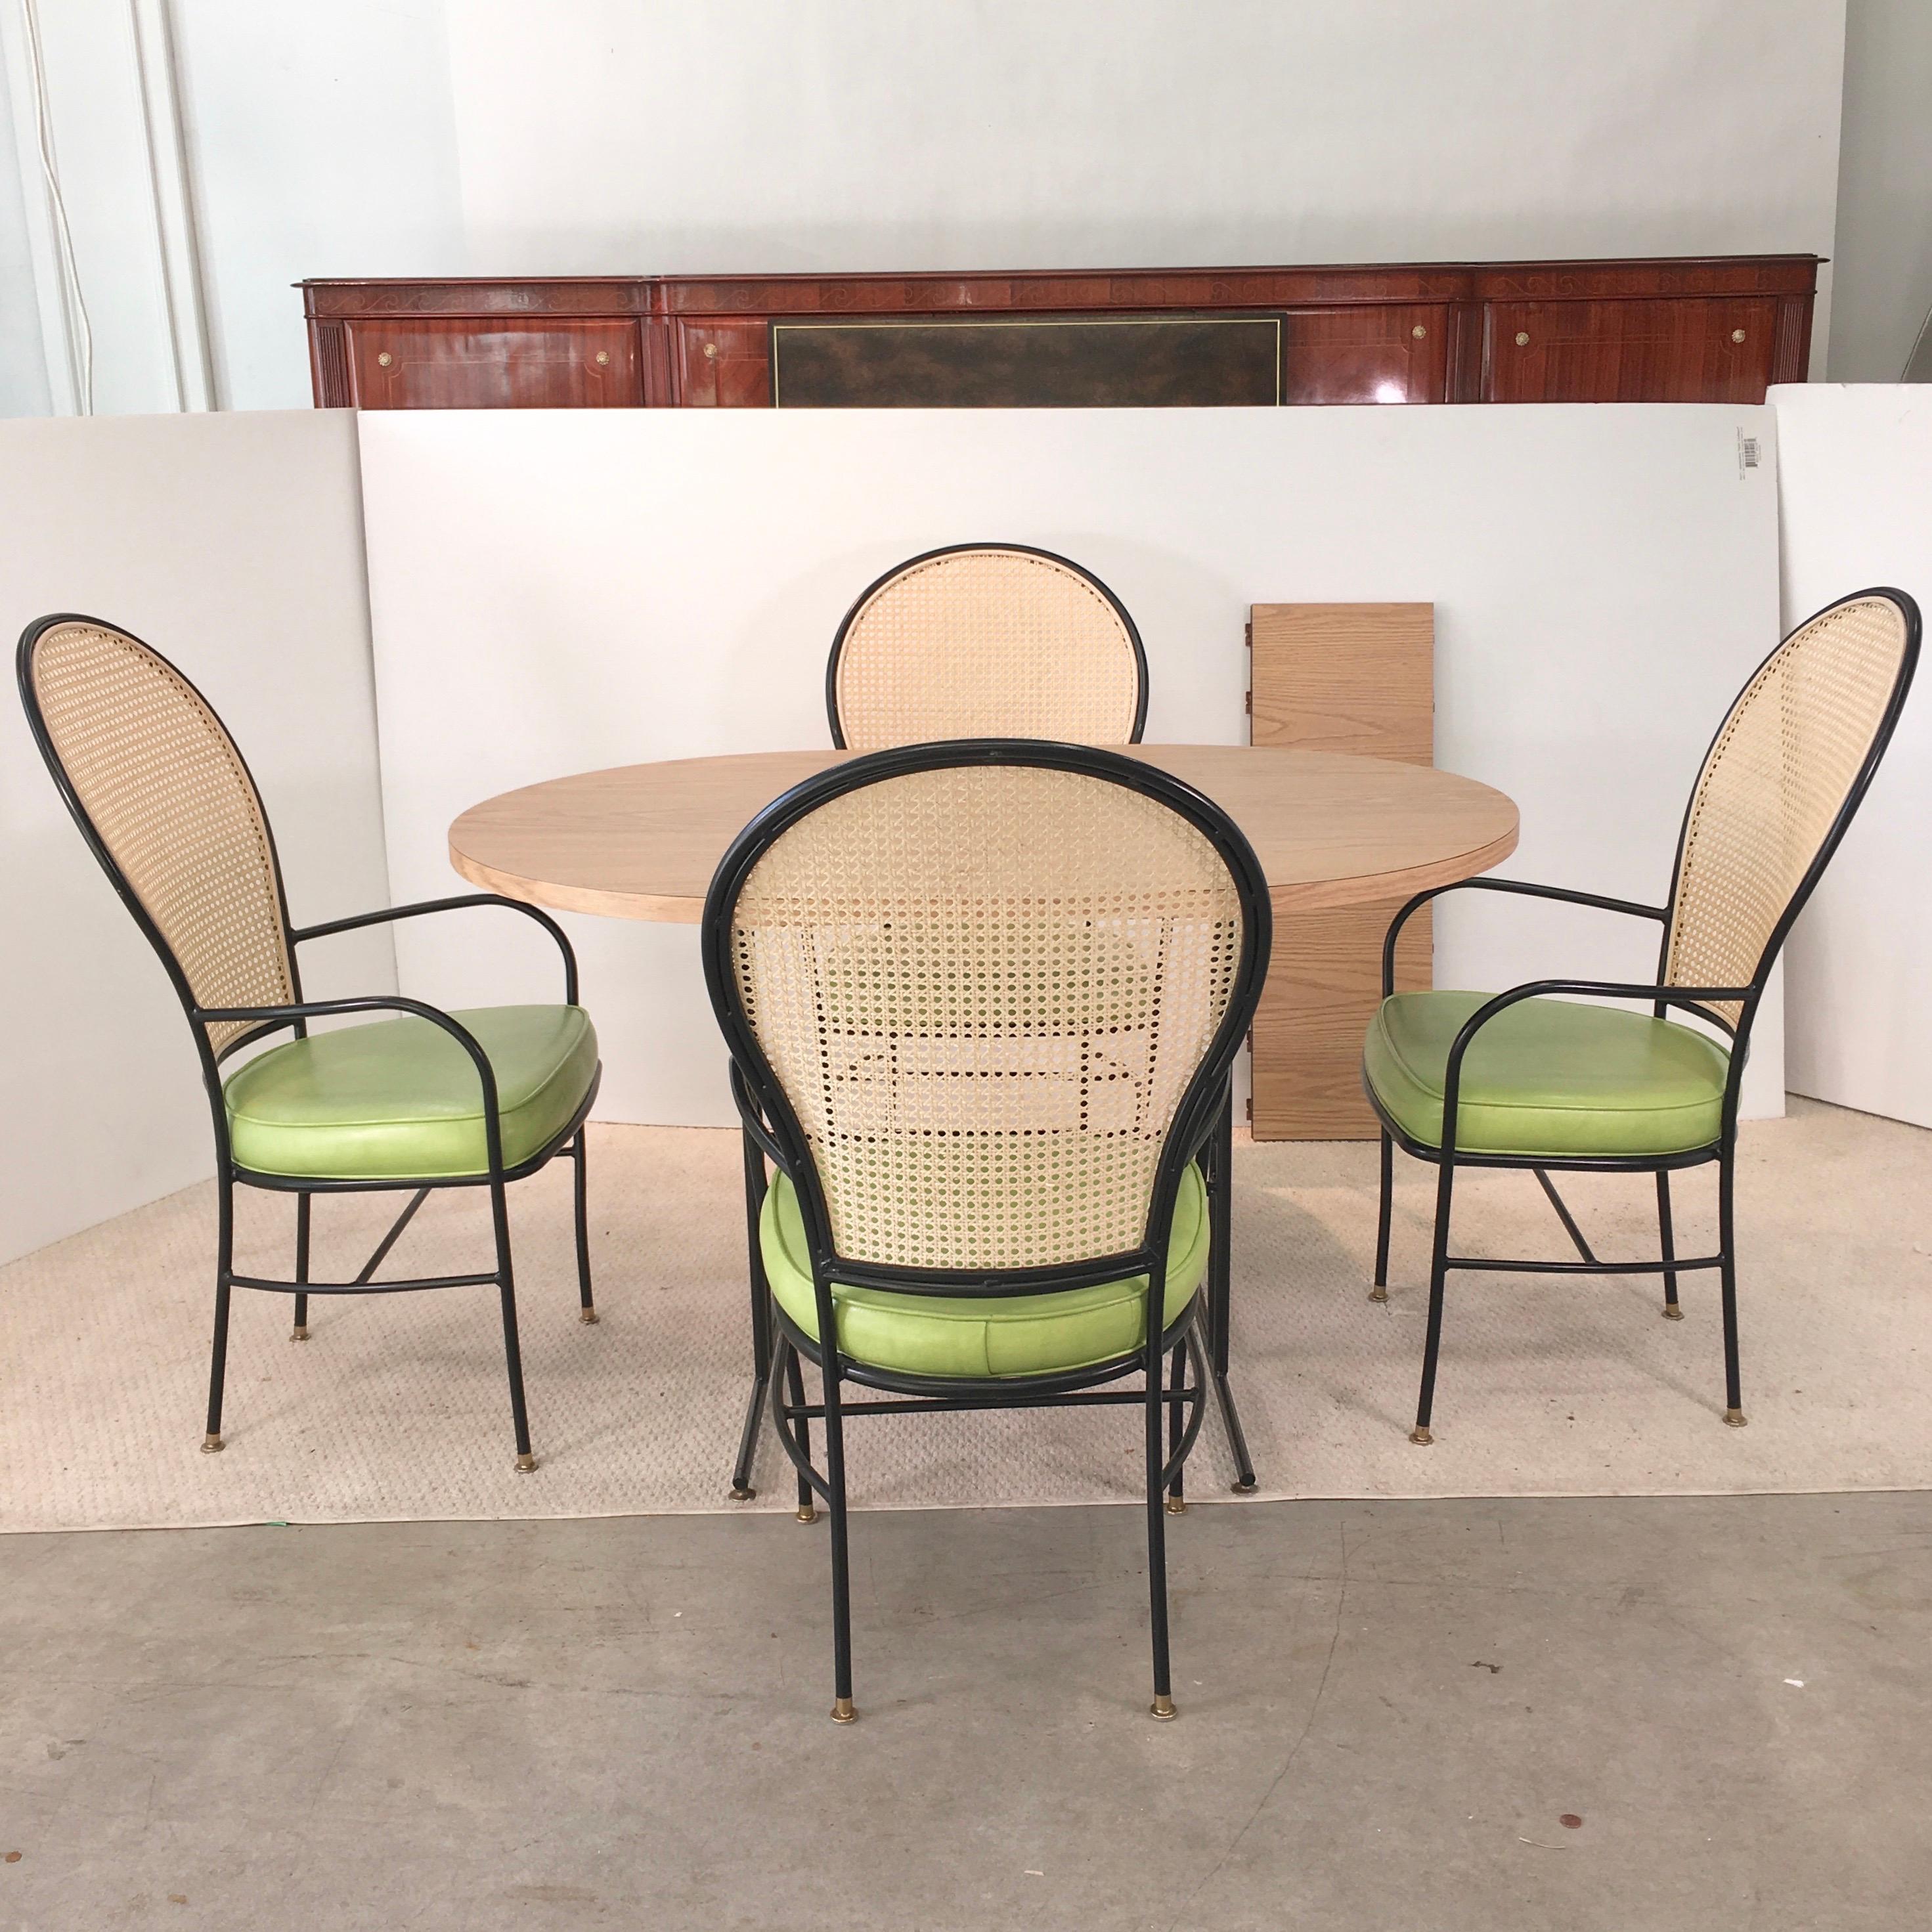 Vintage dinette with great silhouette iby Milo Baughman. Four newly re-caned balloon back blackened iron arm chairs with lime green naugahyde seat cushions and brass tone glide feet. Racetrack oval light oak woodgrain laminate table, expandable with